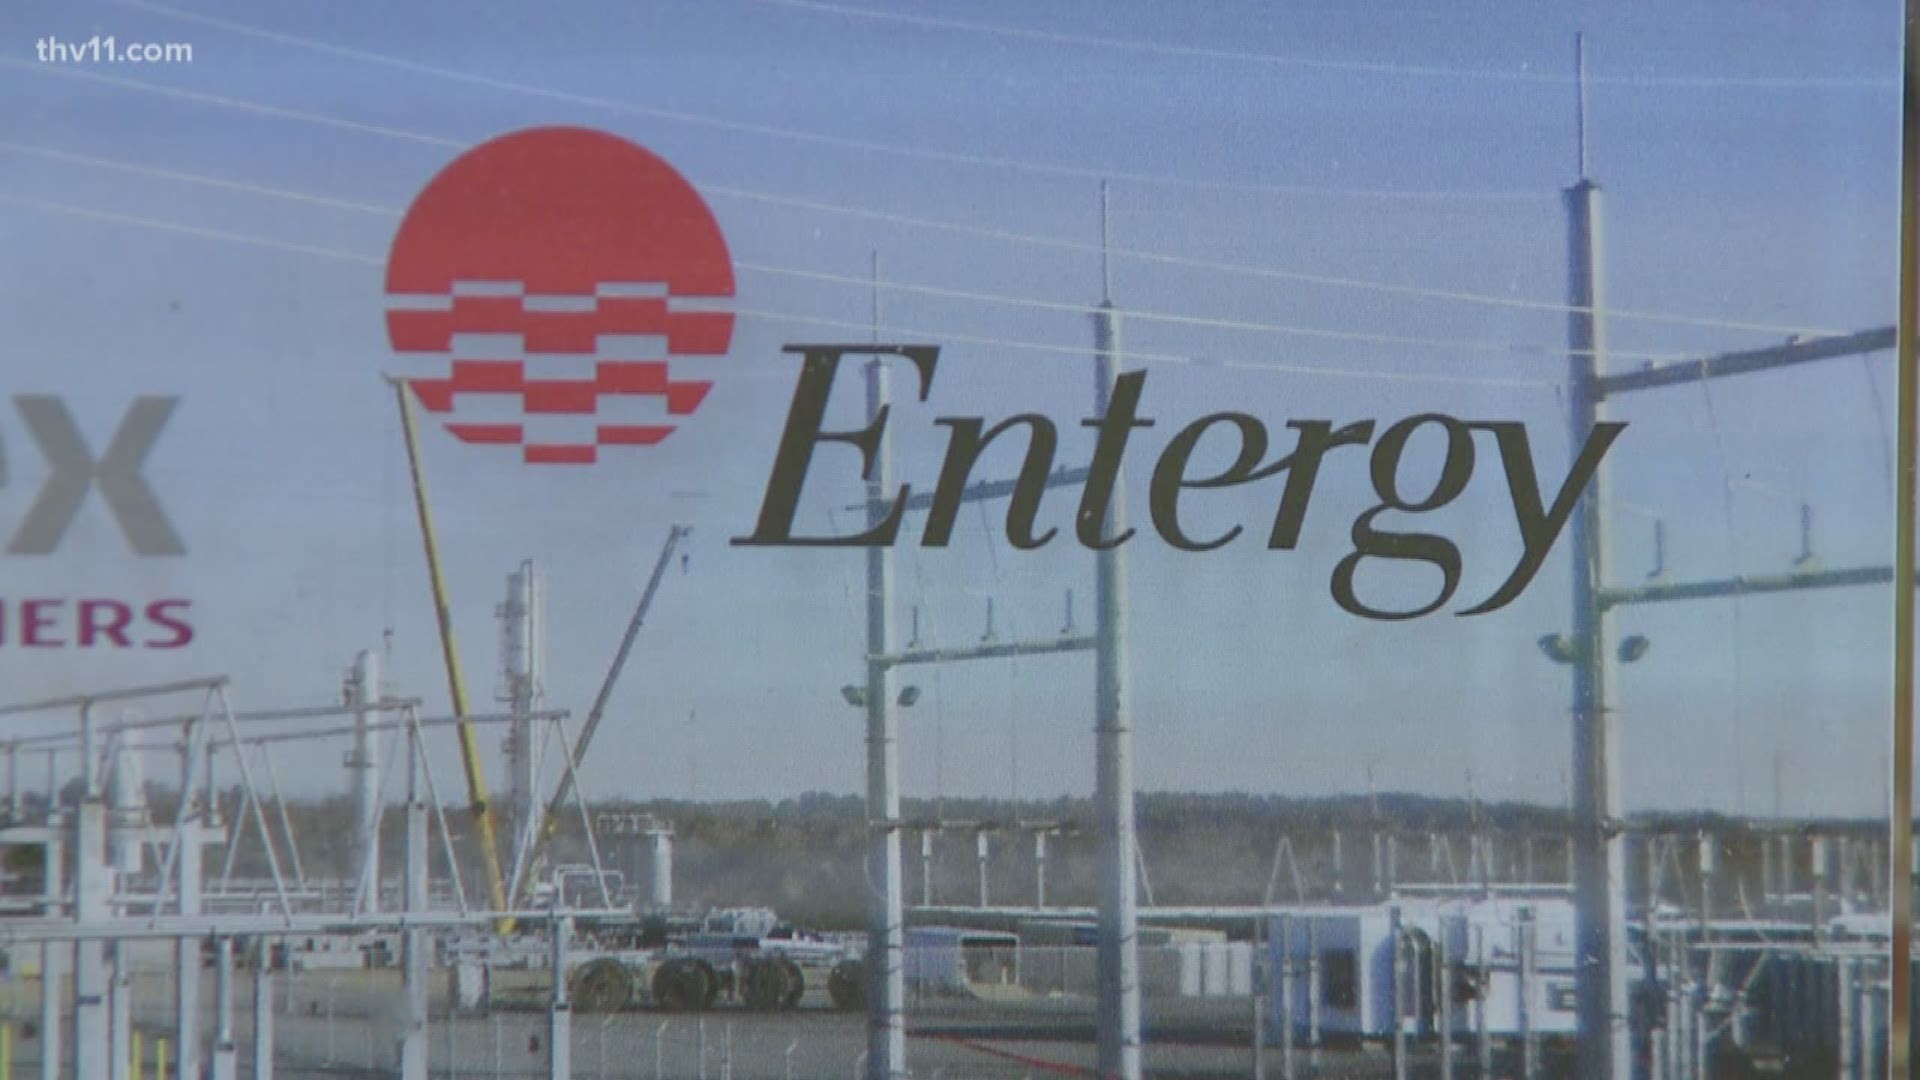 As temperatures rise, Entergy announces cuts on customer bills